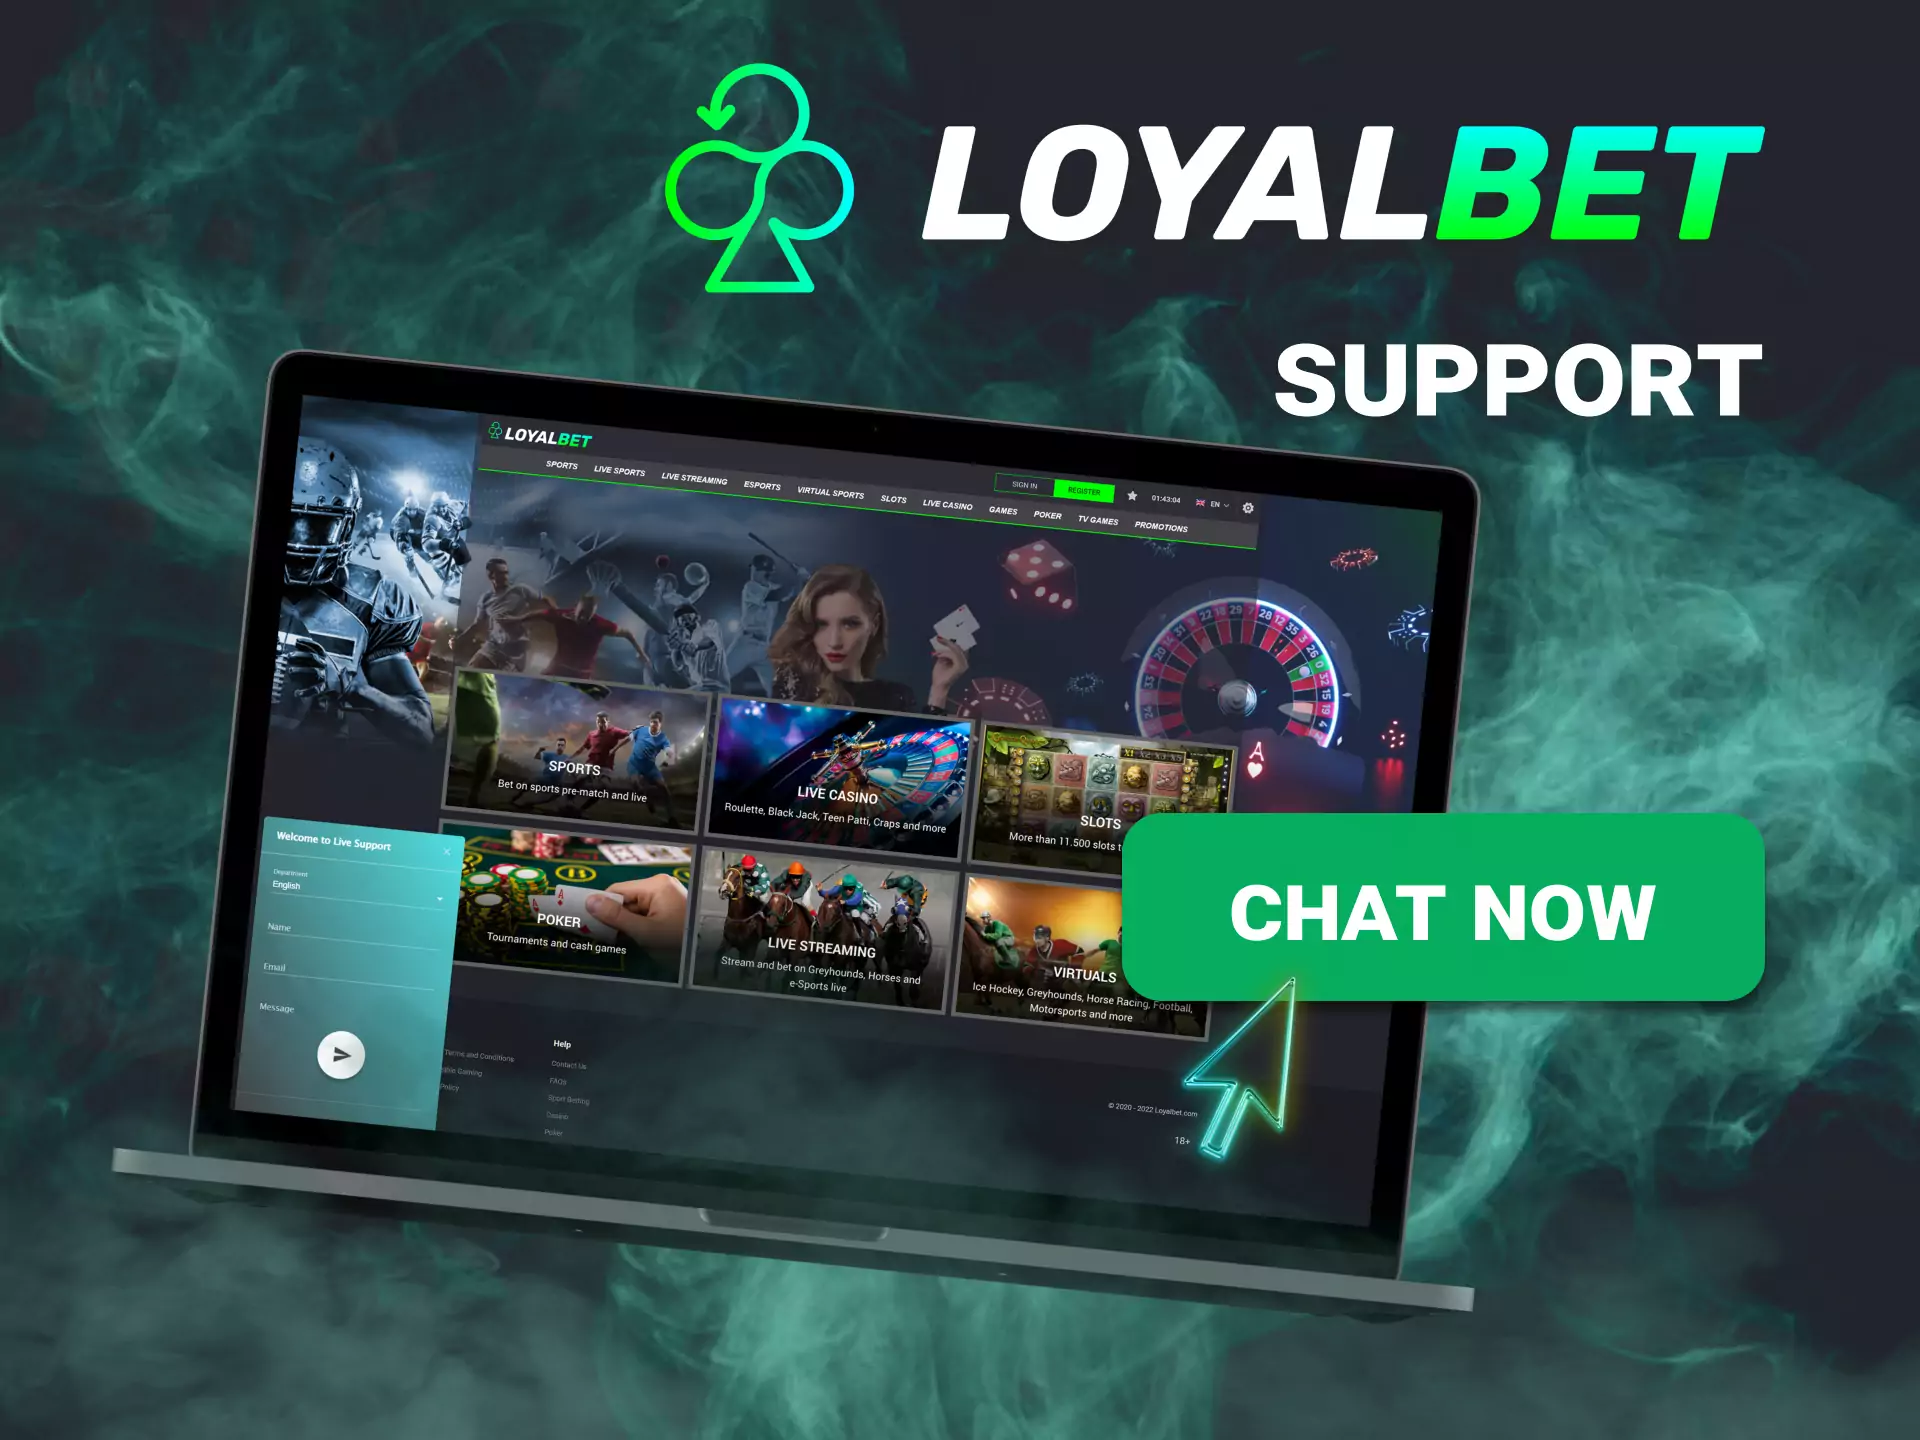 On the Loyalbet website, you can ask customer support in an online chat.